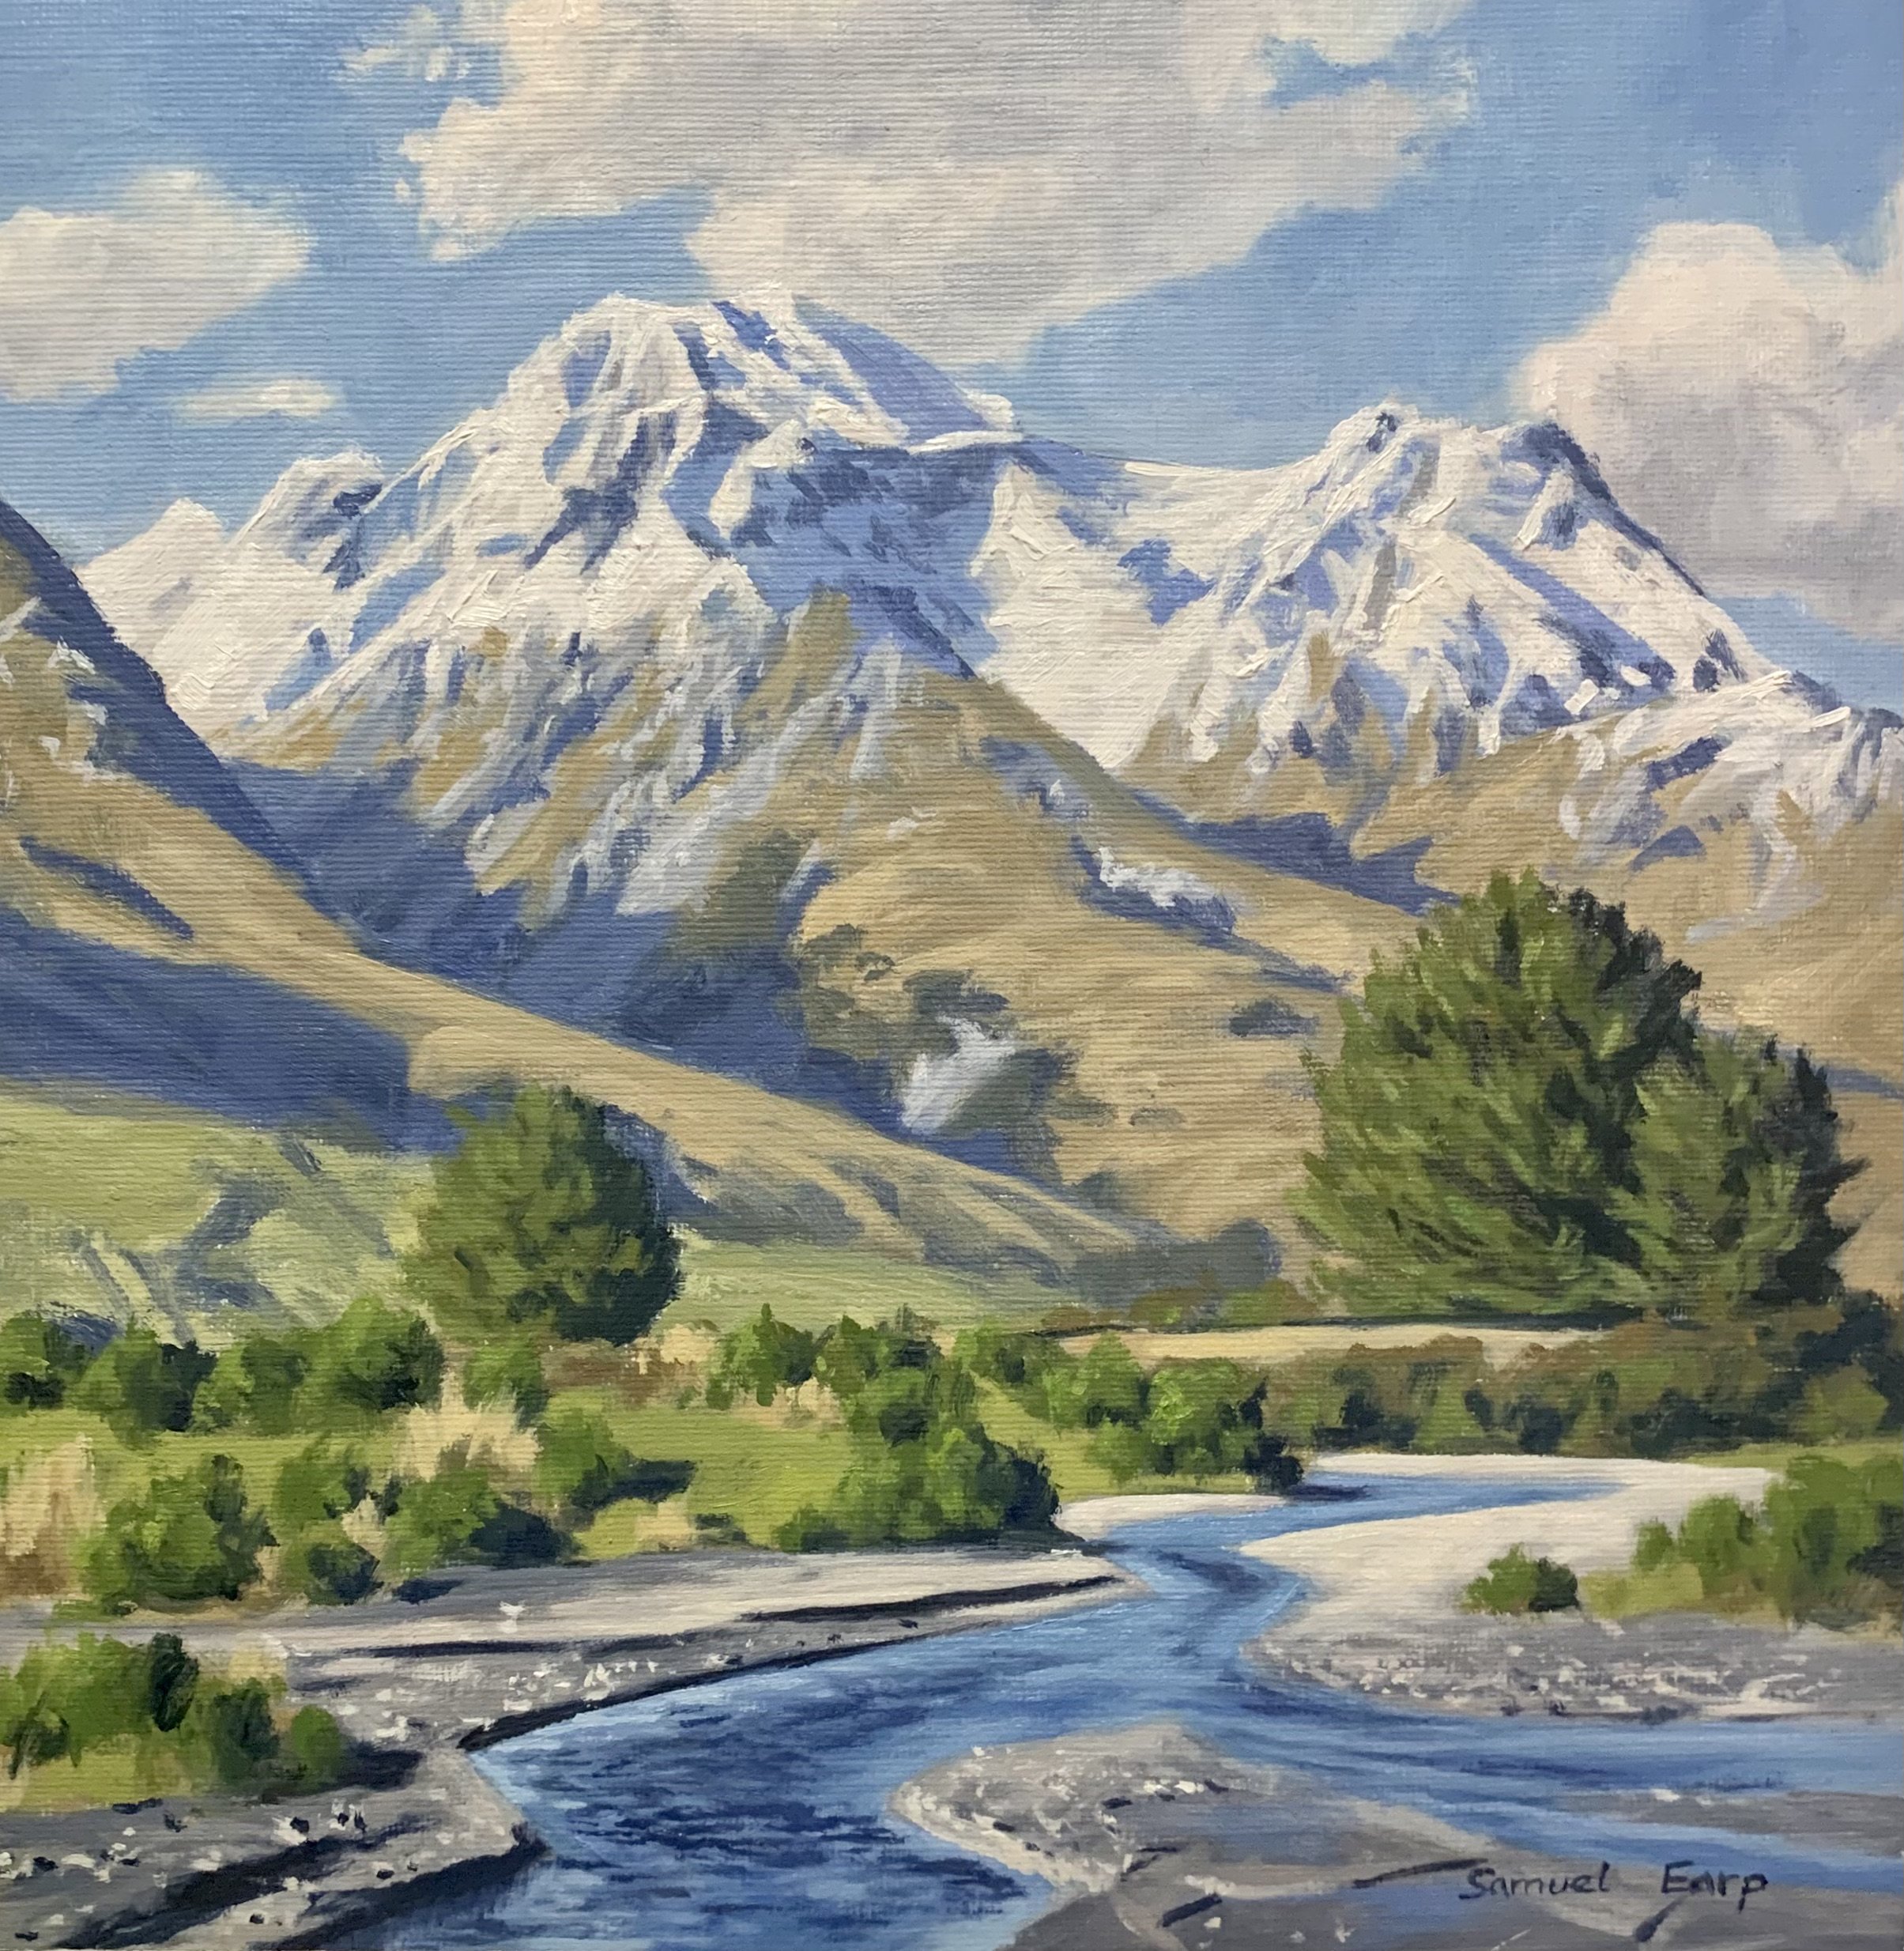 12 Paintings For Beginners, Complete Guide on Blending Techniques